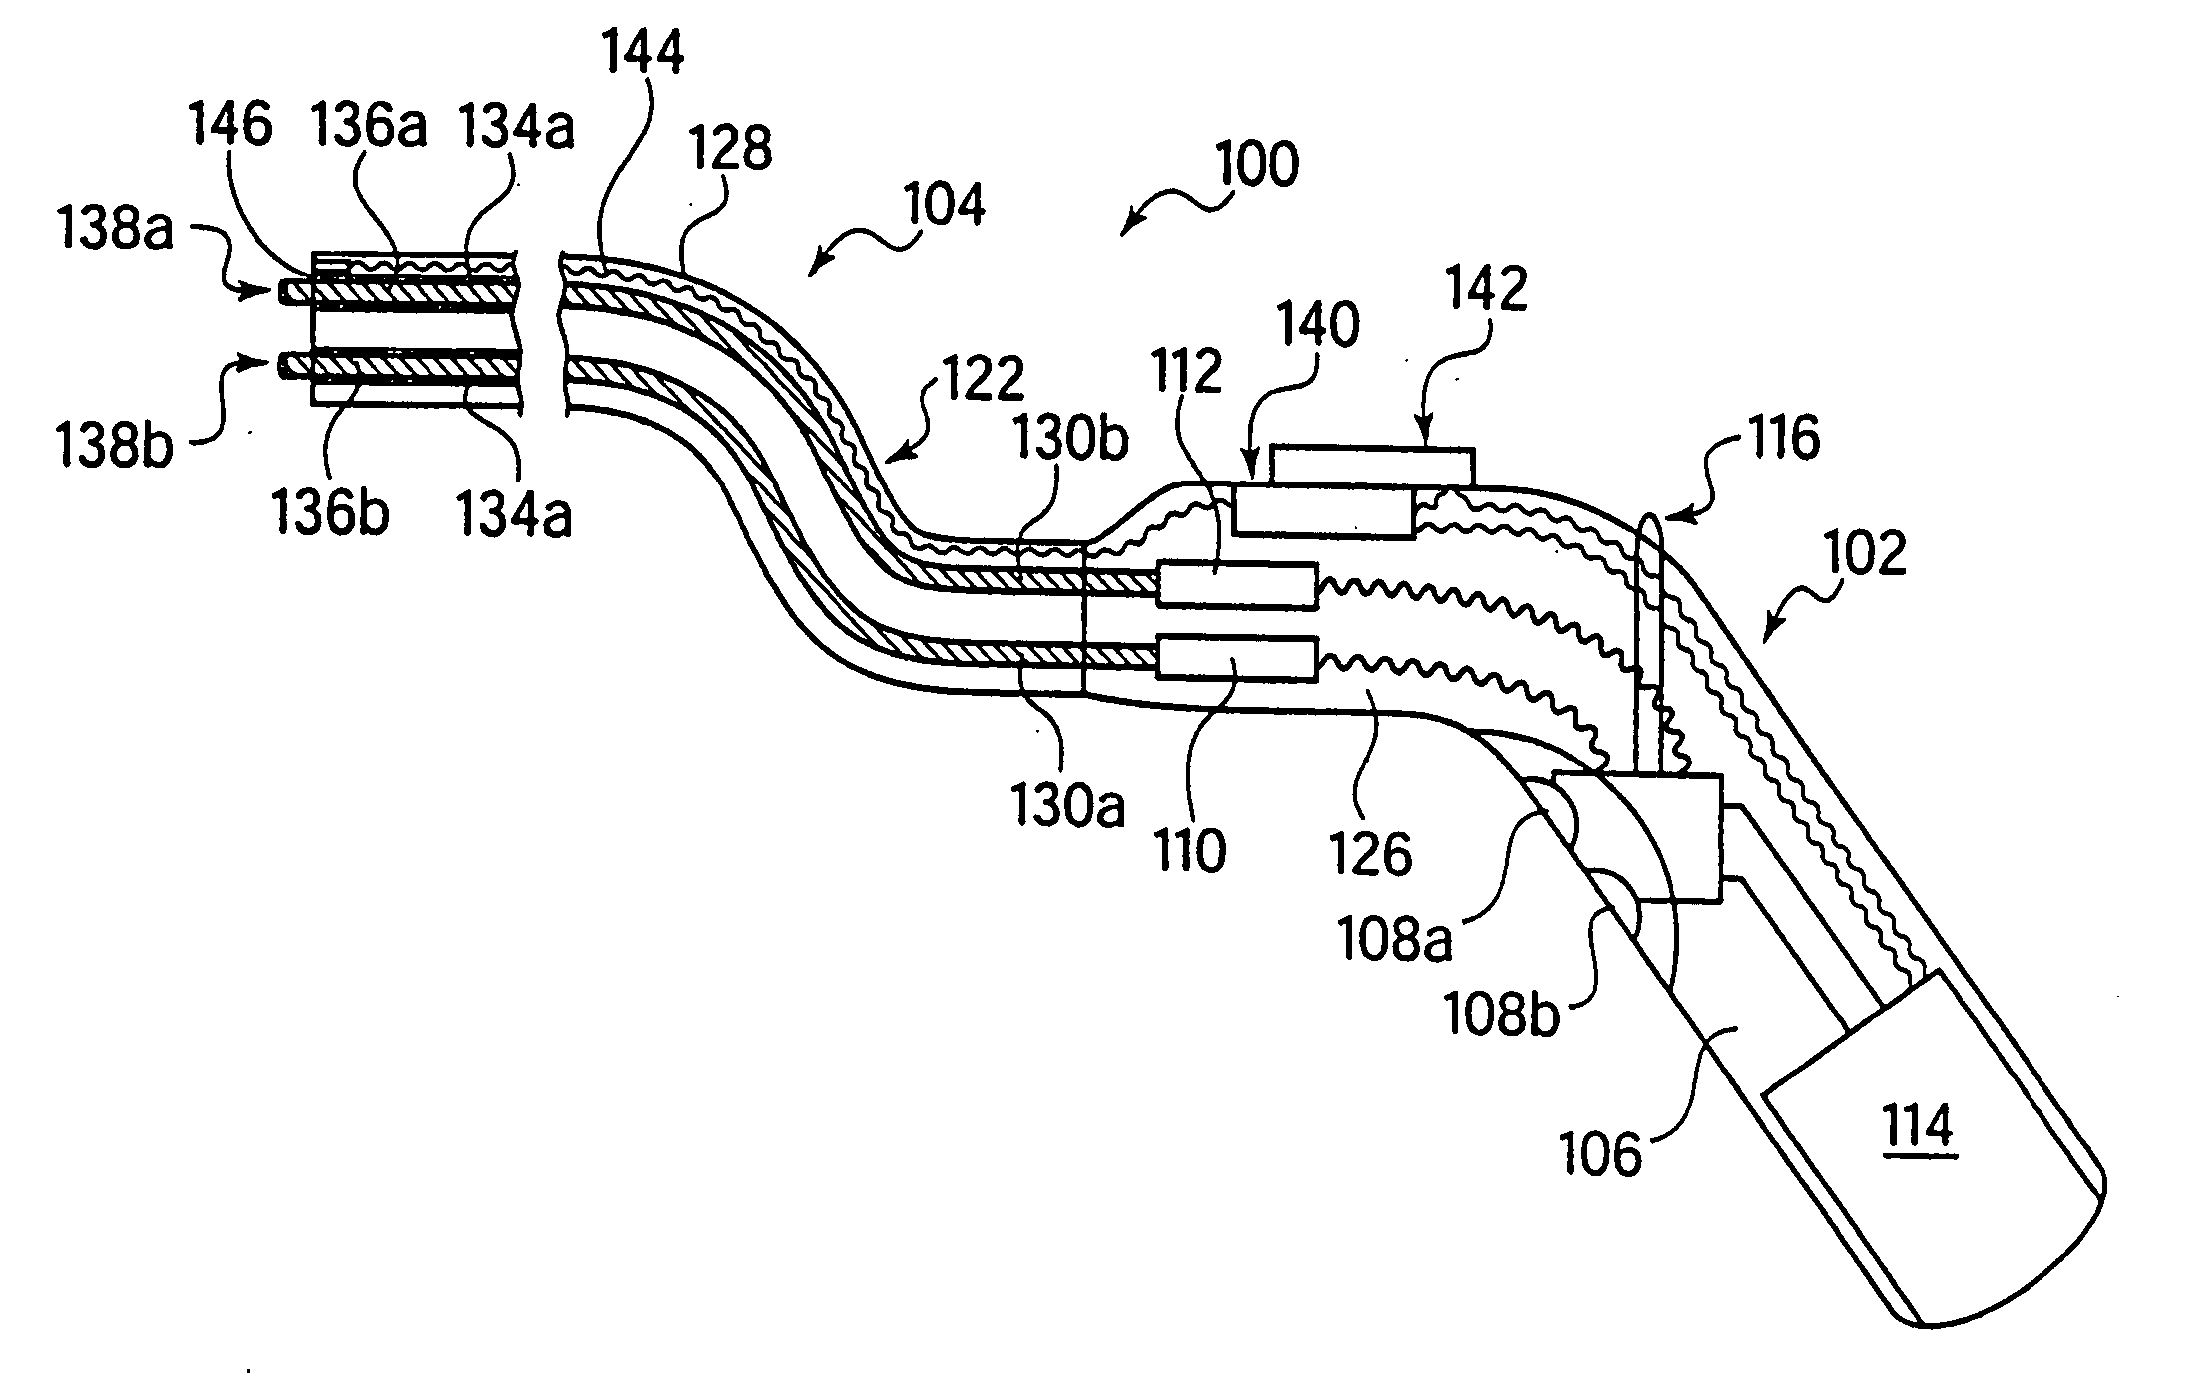 Electromechanical driver and remote surgical instrument attachment having computer assisted control capabilities